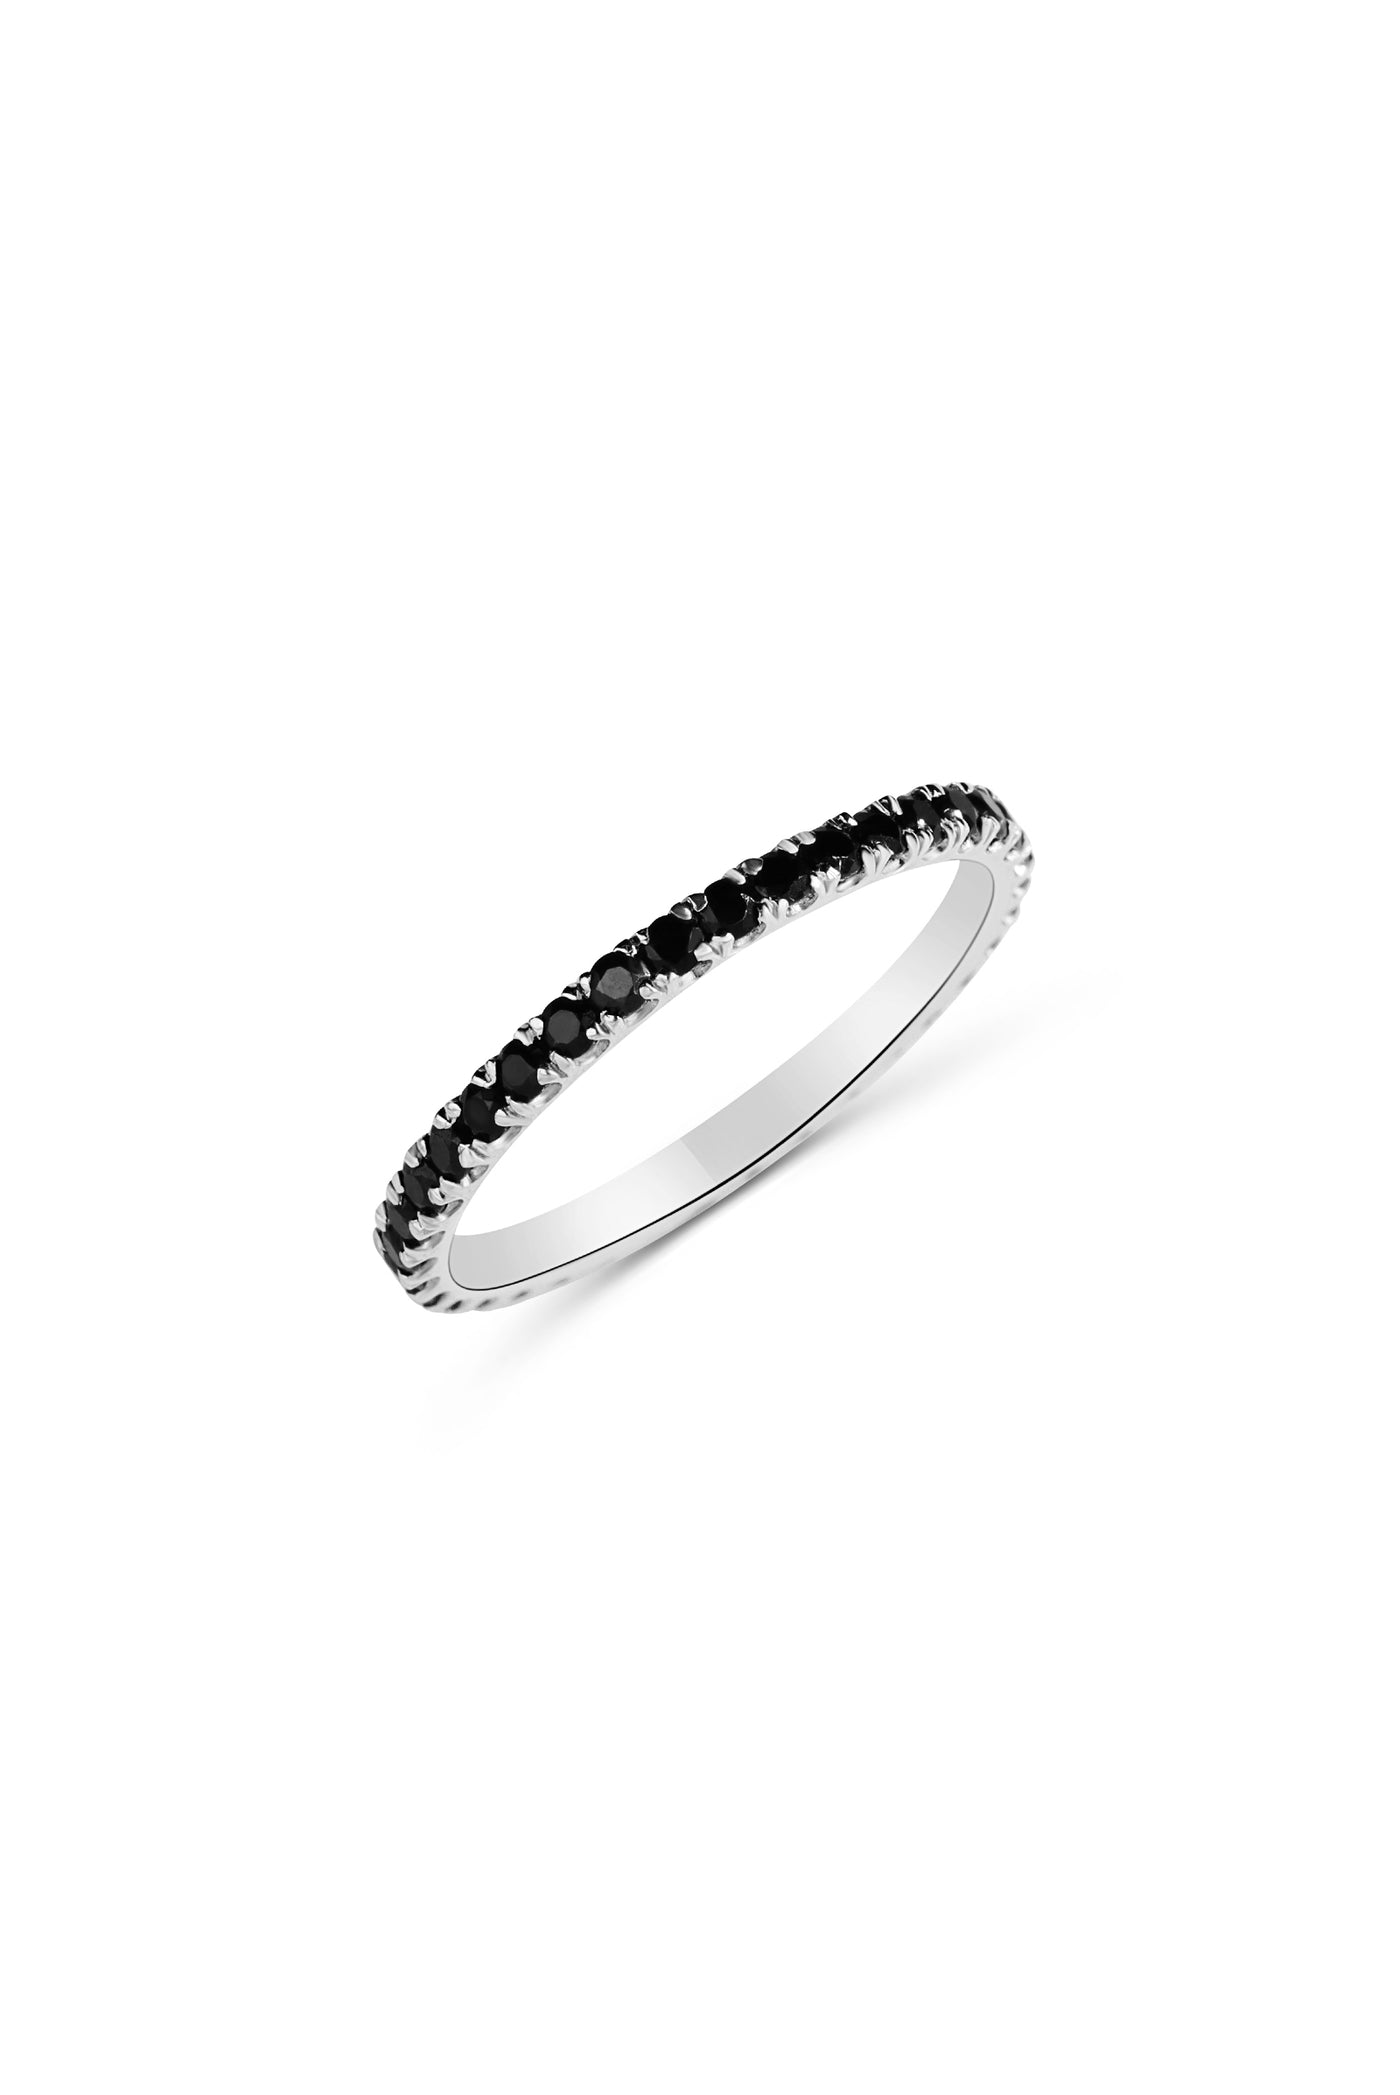 Eternity Rings - What Do They Symbolise & When Should You Get Them? | Max  Diamonds